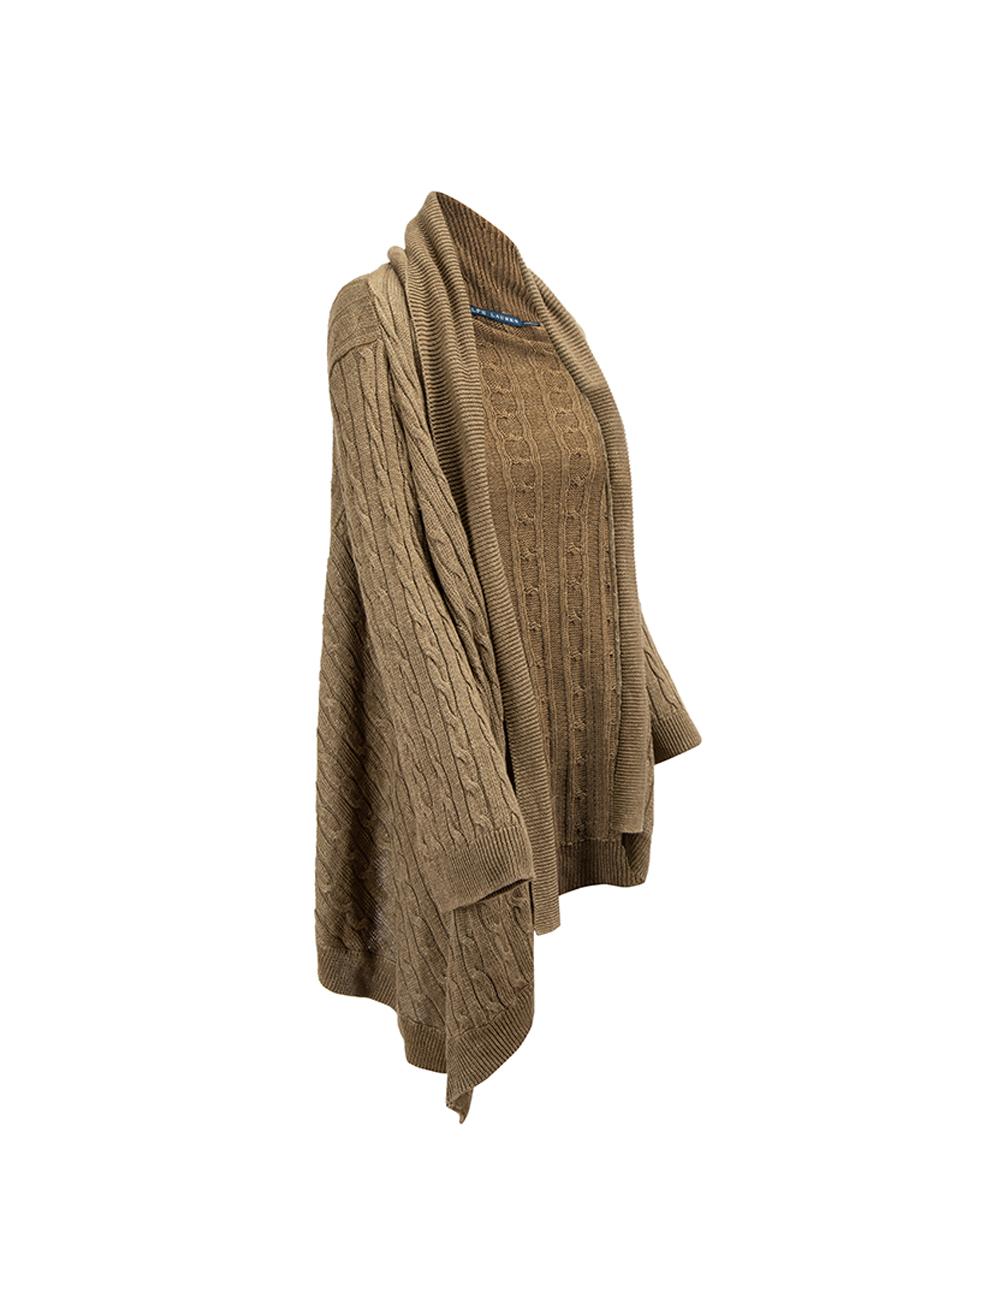 CONDITION is Very good. Hardly any visible wear to cardigan is evident on this used Ralph Lauren designer resale item. 



Details


Brown

Linen

Cable knit cardigan

Oversized Fit

Open front

Front side pockets





Made in